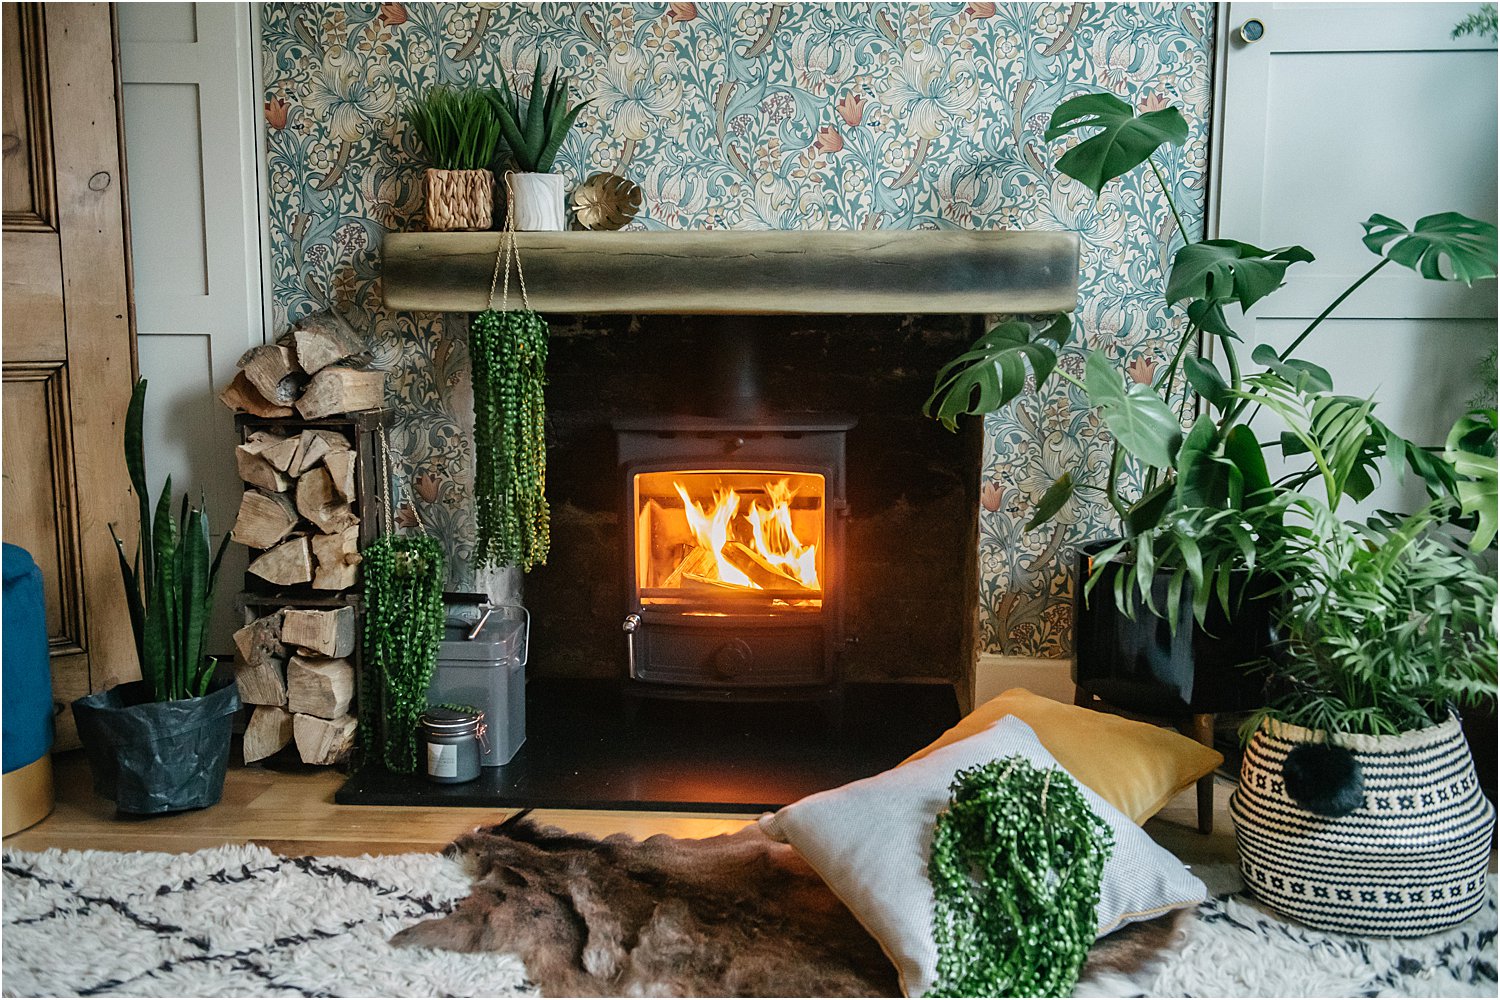 how-a-wood-burner-stove-changed-lifestyle-cosy-maximalist-eclectic-interiors-lily-sawyer-photo